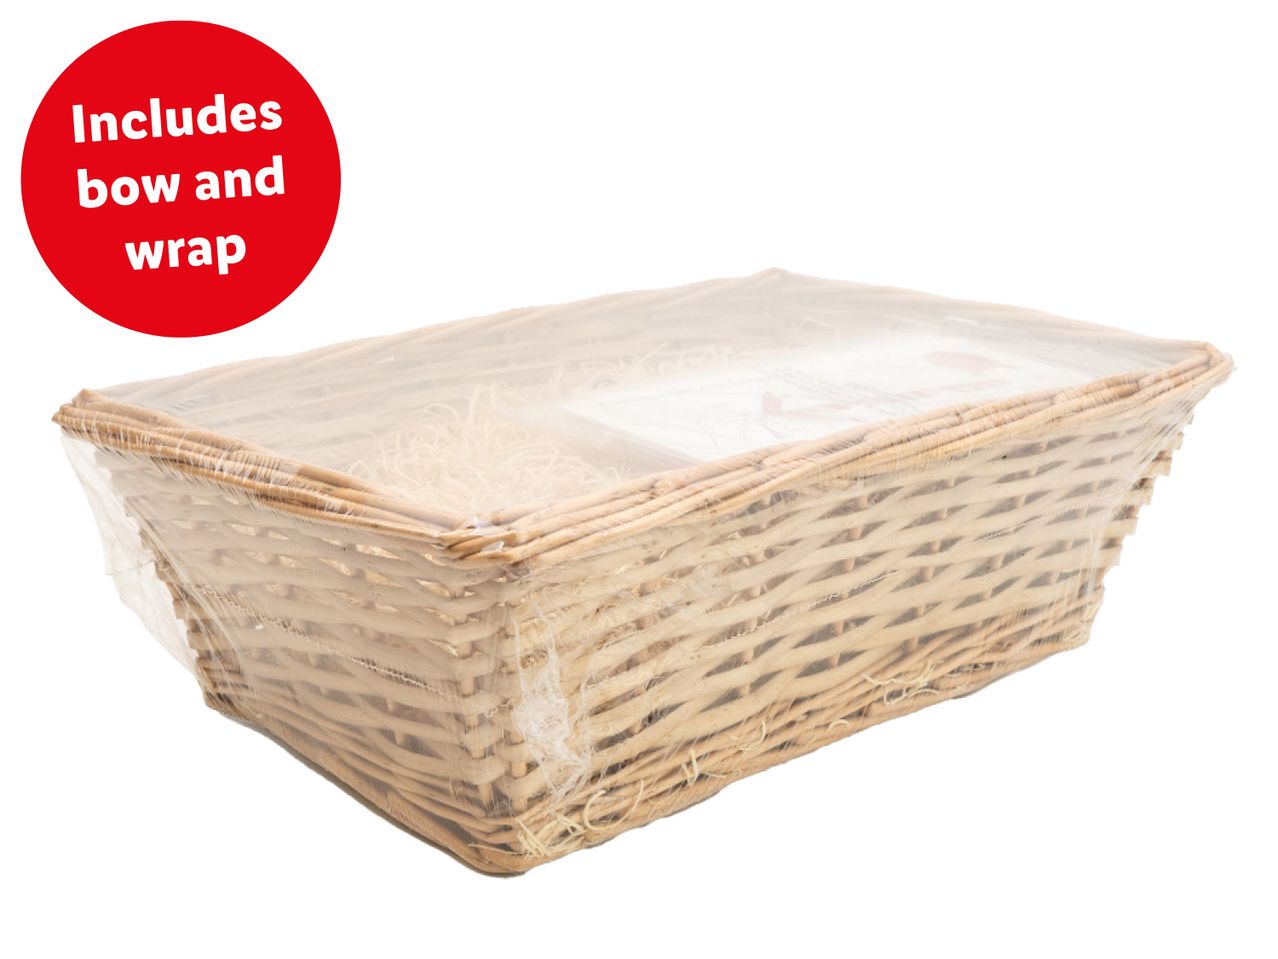 Go to full screen view: Fill Your Own Hamper Basket - Image 1